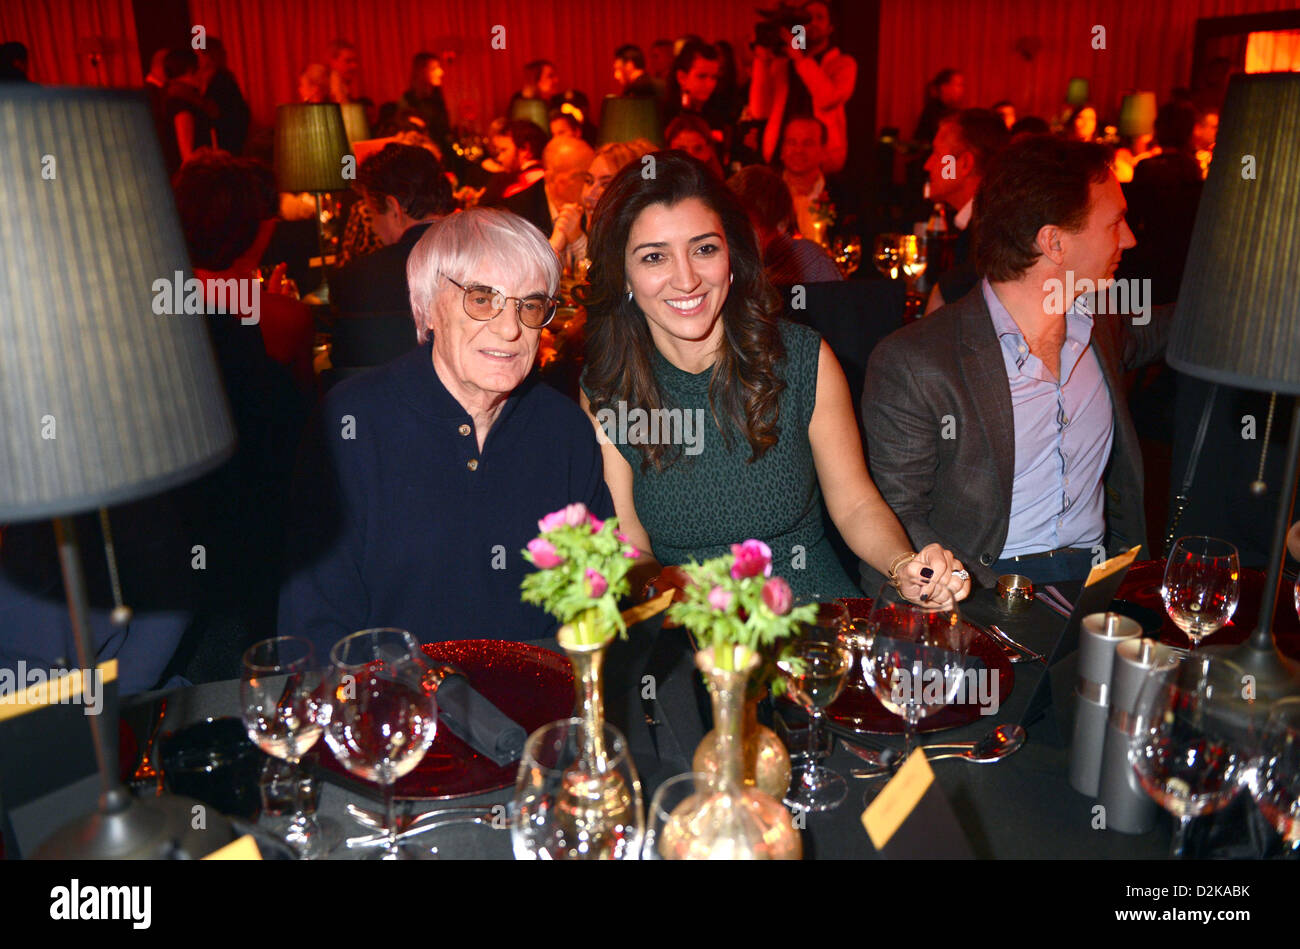 Formula One boss Bernie Ecclestone (L) and his wife Fabiana Flosi celebrate at the Kitz Race Party after Hahnenkamm Race in Kitzbuehel, Austria, 26 January 2013. This weekend celebrities are coming together in the ski metropolis. Photo: FELIX HOERHAGER Stock Photo